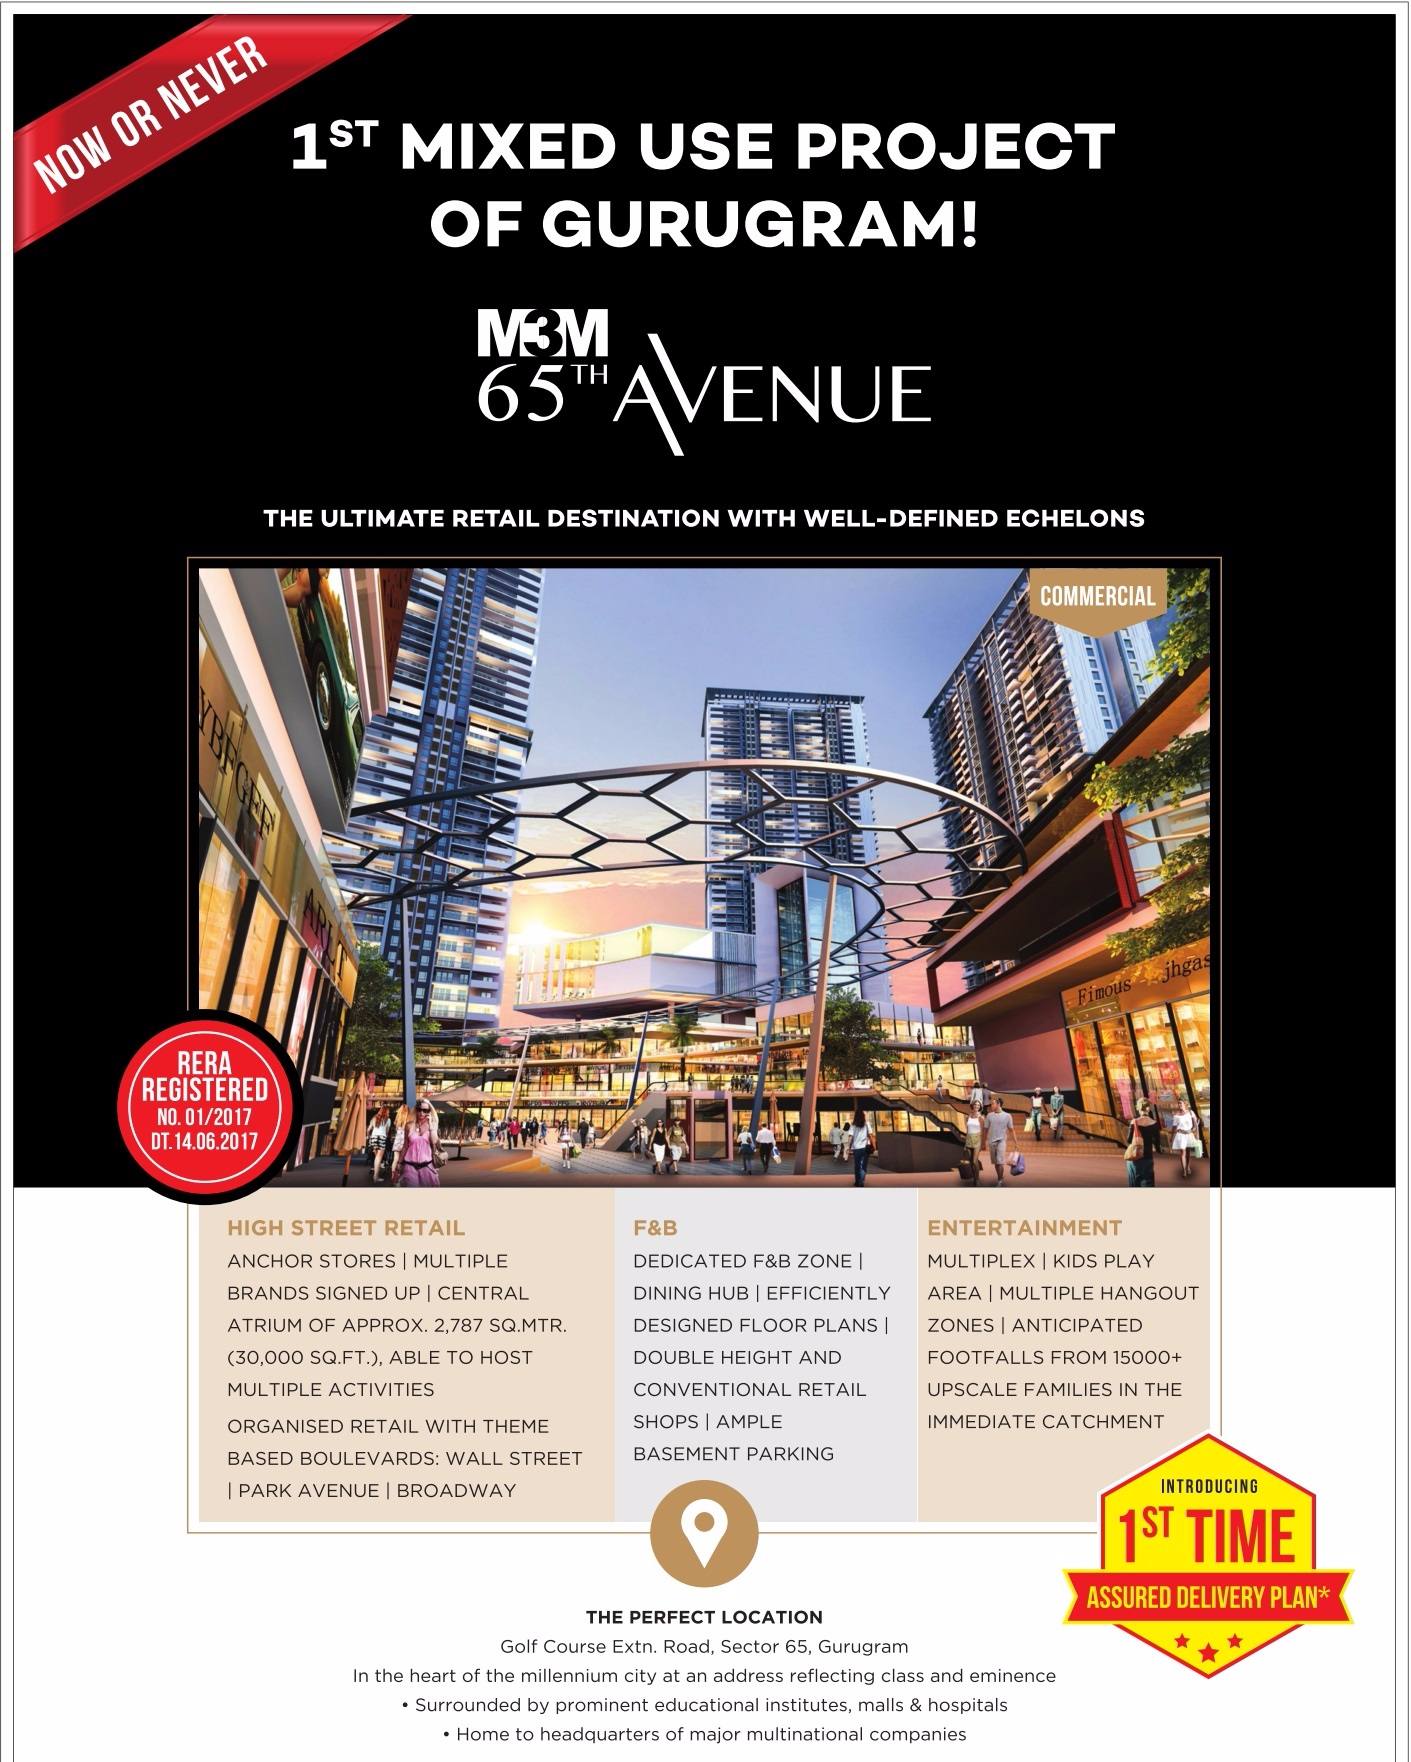 The ultimate retail destination with well-defined echelons at M3M 65th Avenue in Gurgaon Update